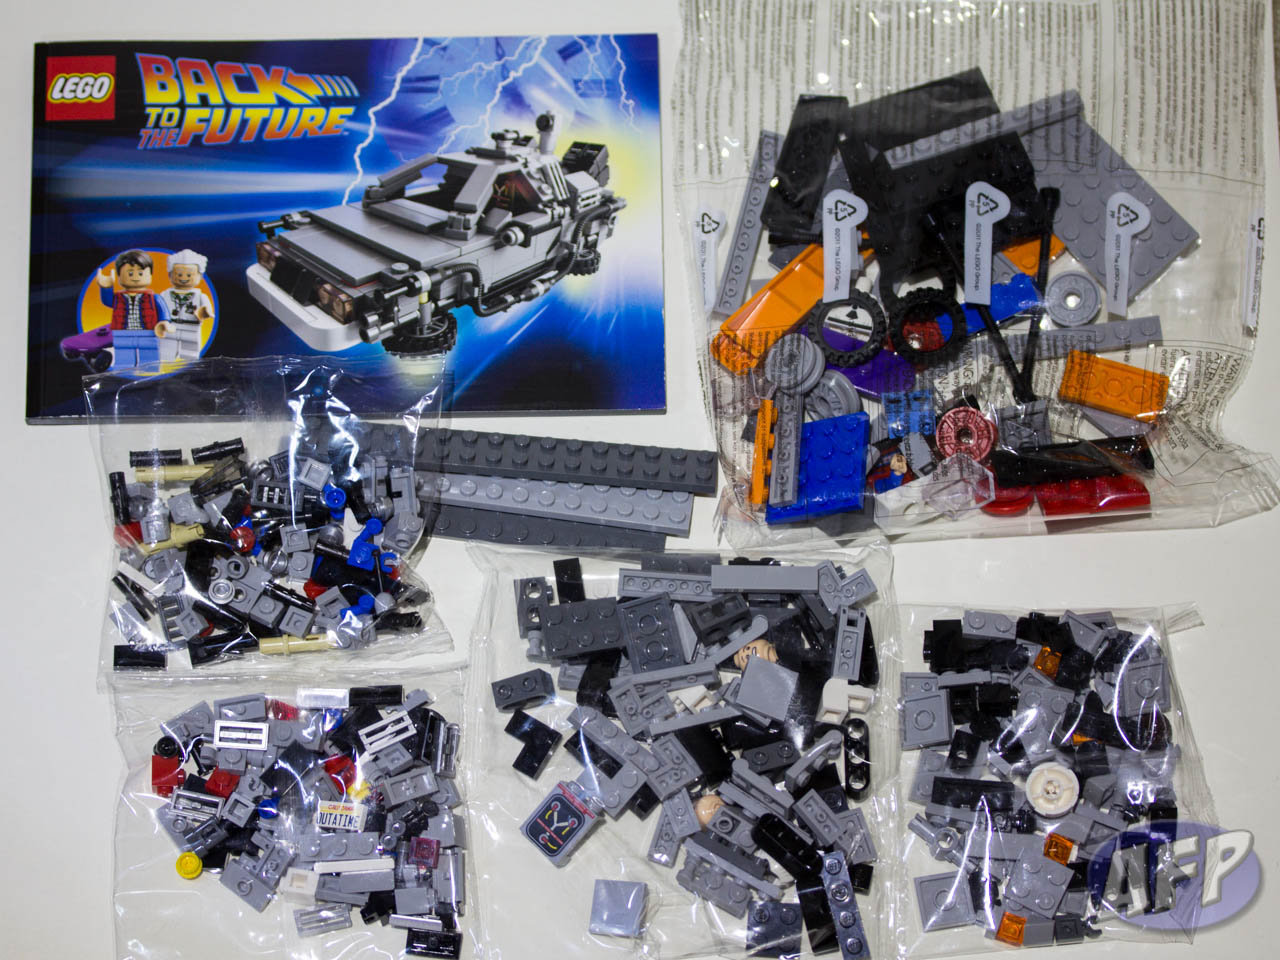 Back To the Future's DeLorean Revealed In Incredible New LEGO Set